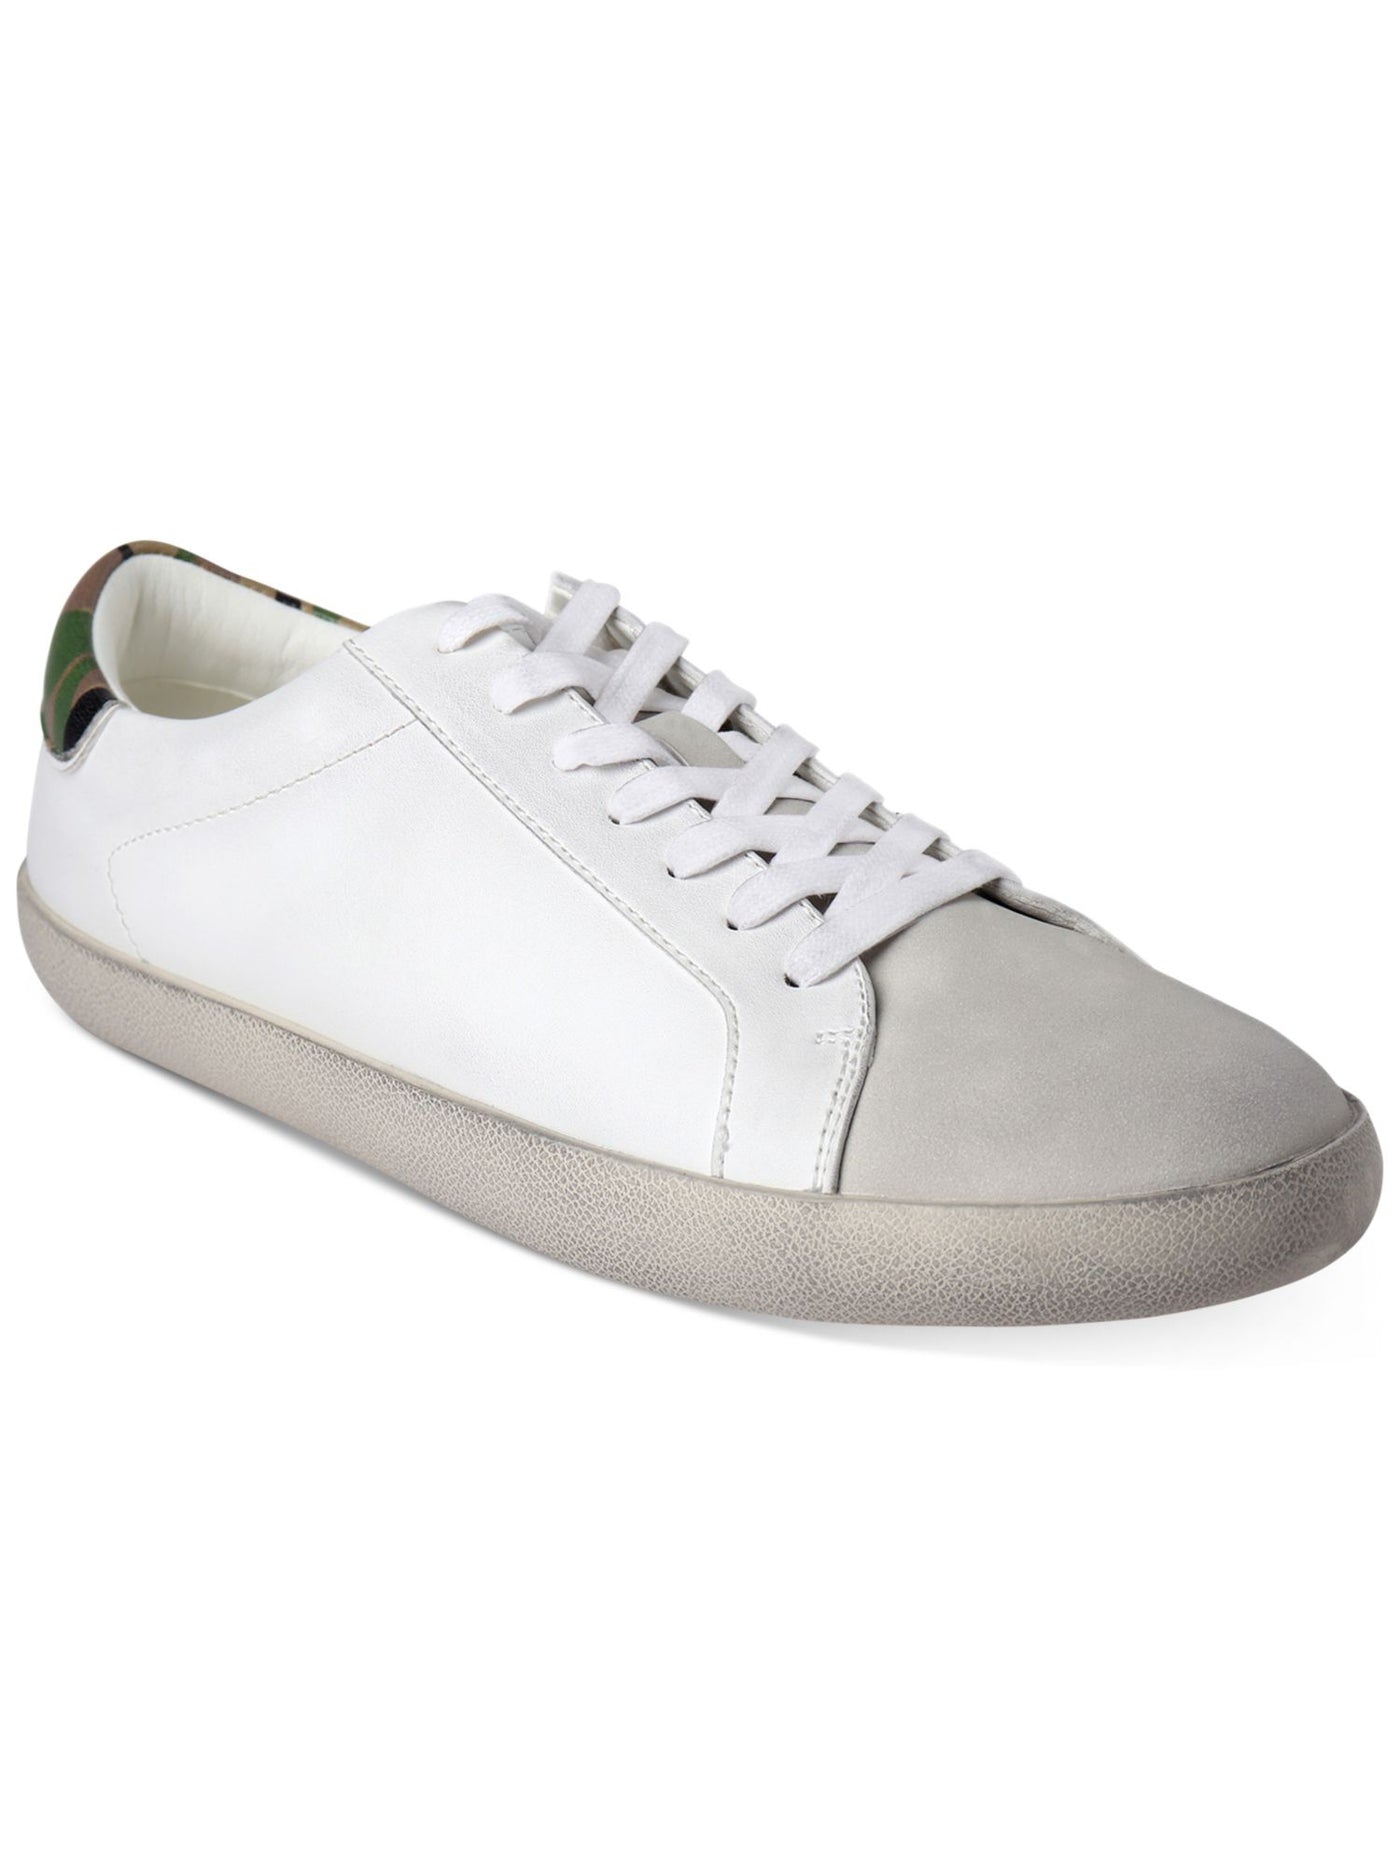 INC Mens White Mixed Media Padded Damon Round Toe Lace-Up Sneakers Shoes 12 M